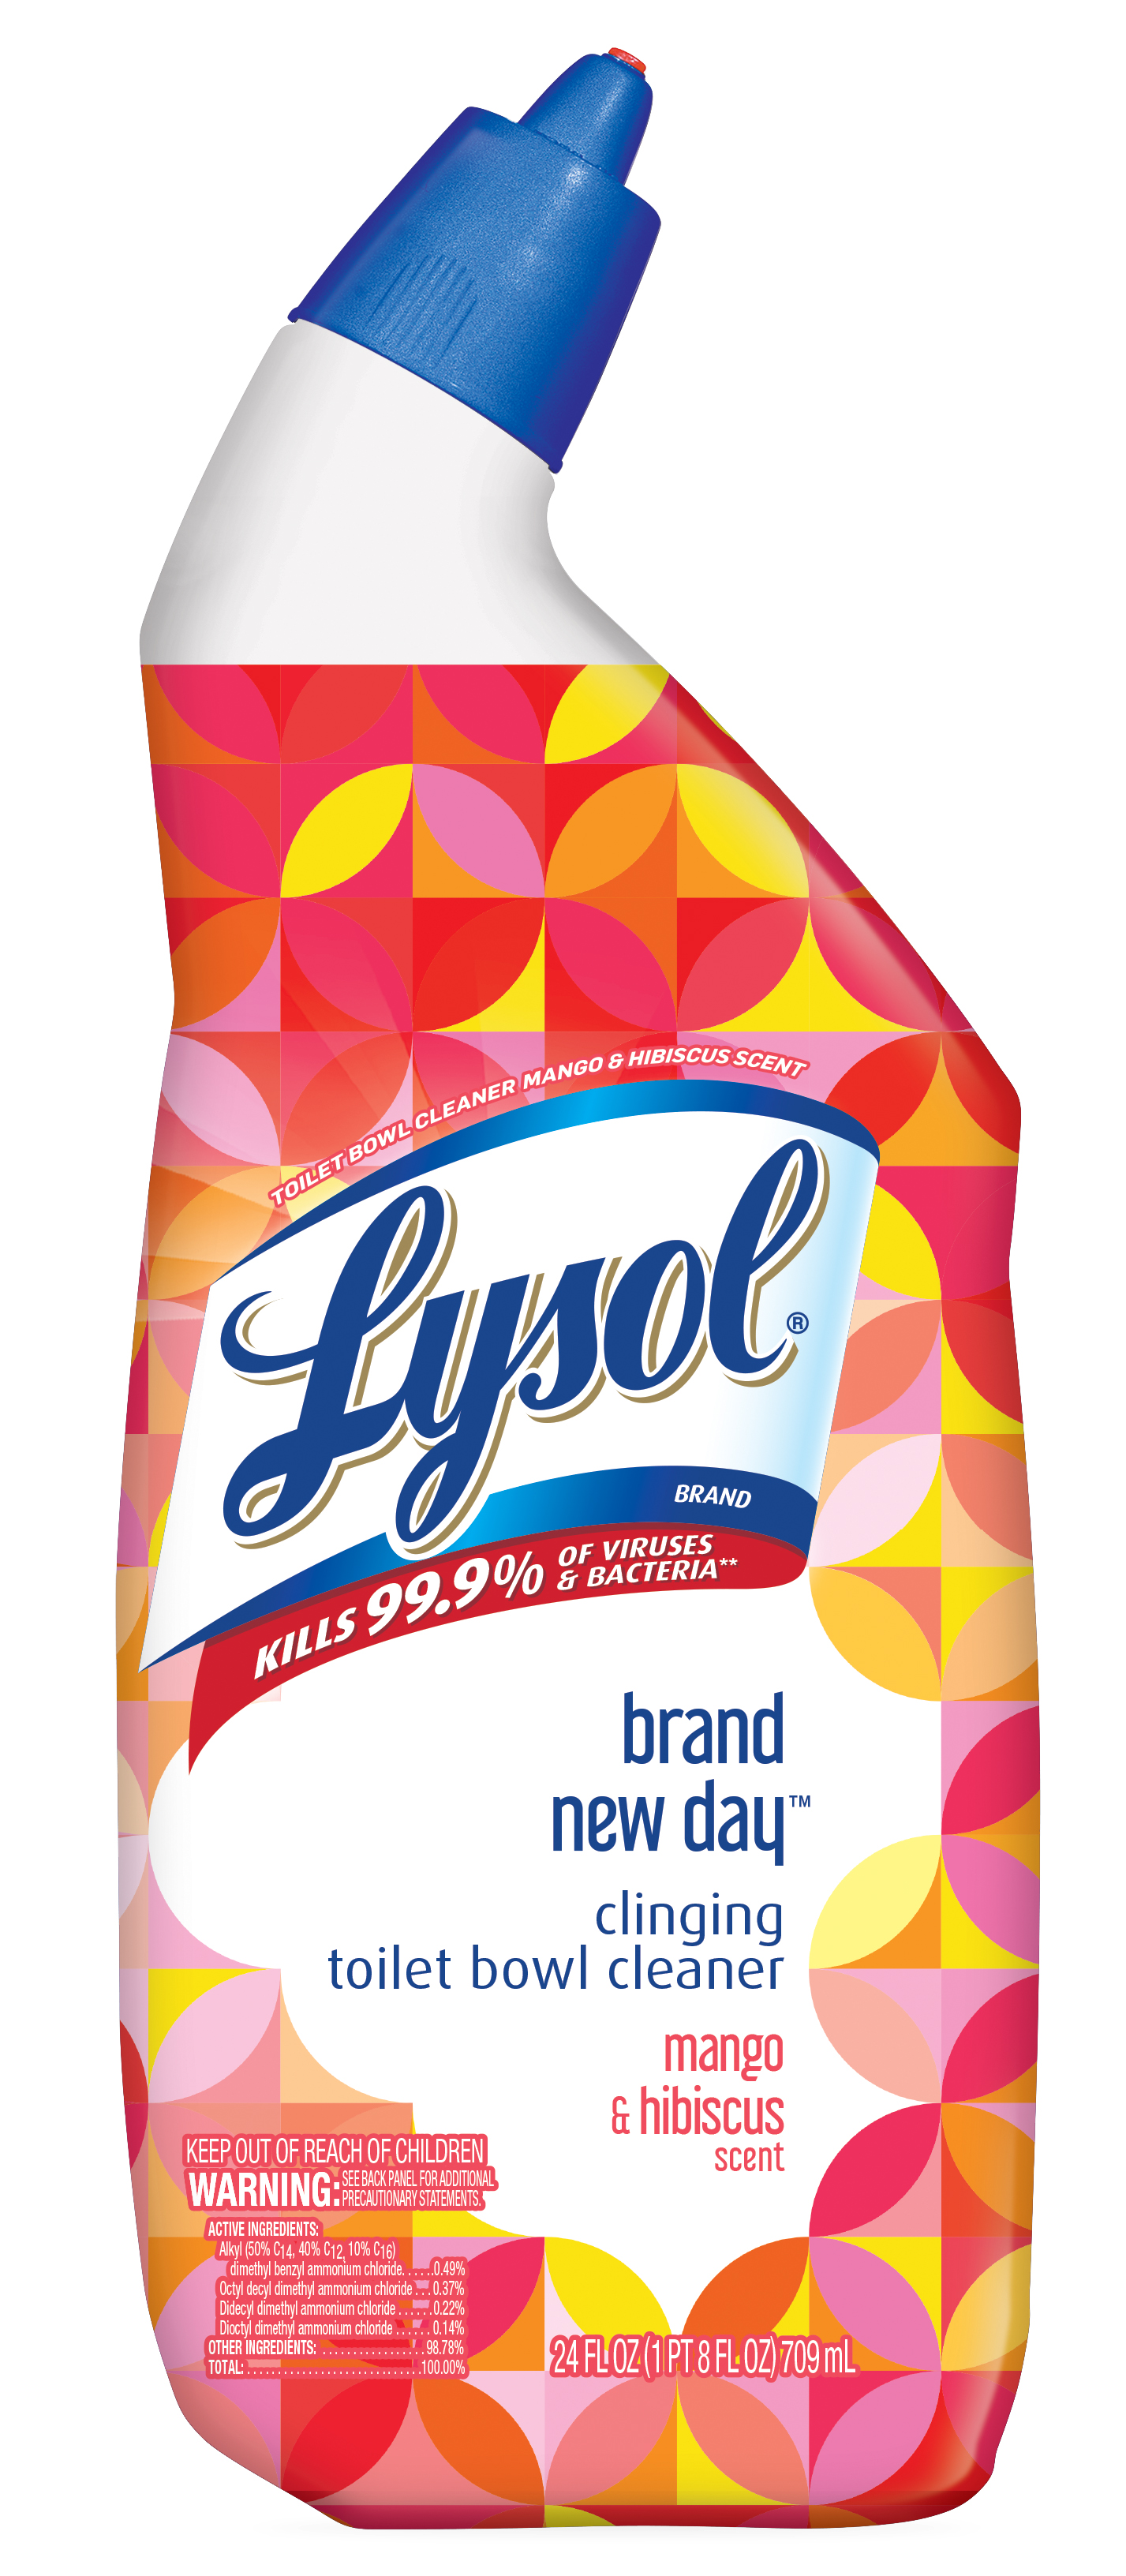 Lysol Toilet Bowl Cleaner Gel, For Cleaning and Disinfecting, Stain Removal, Brand New Day, Mango and Hibiscus, 24oz - image 1 of 6